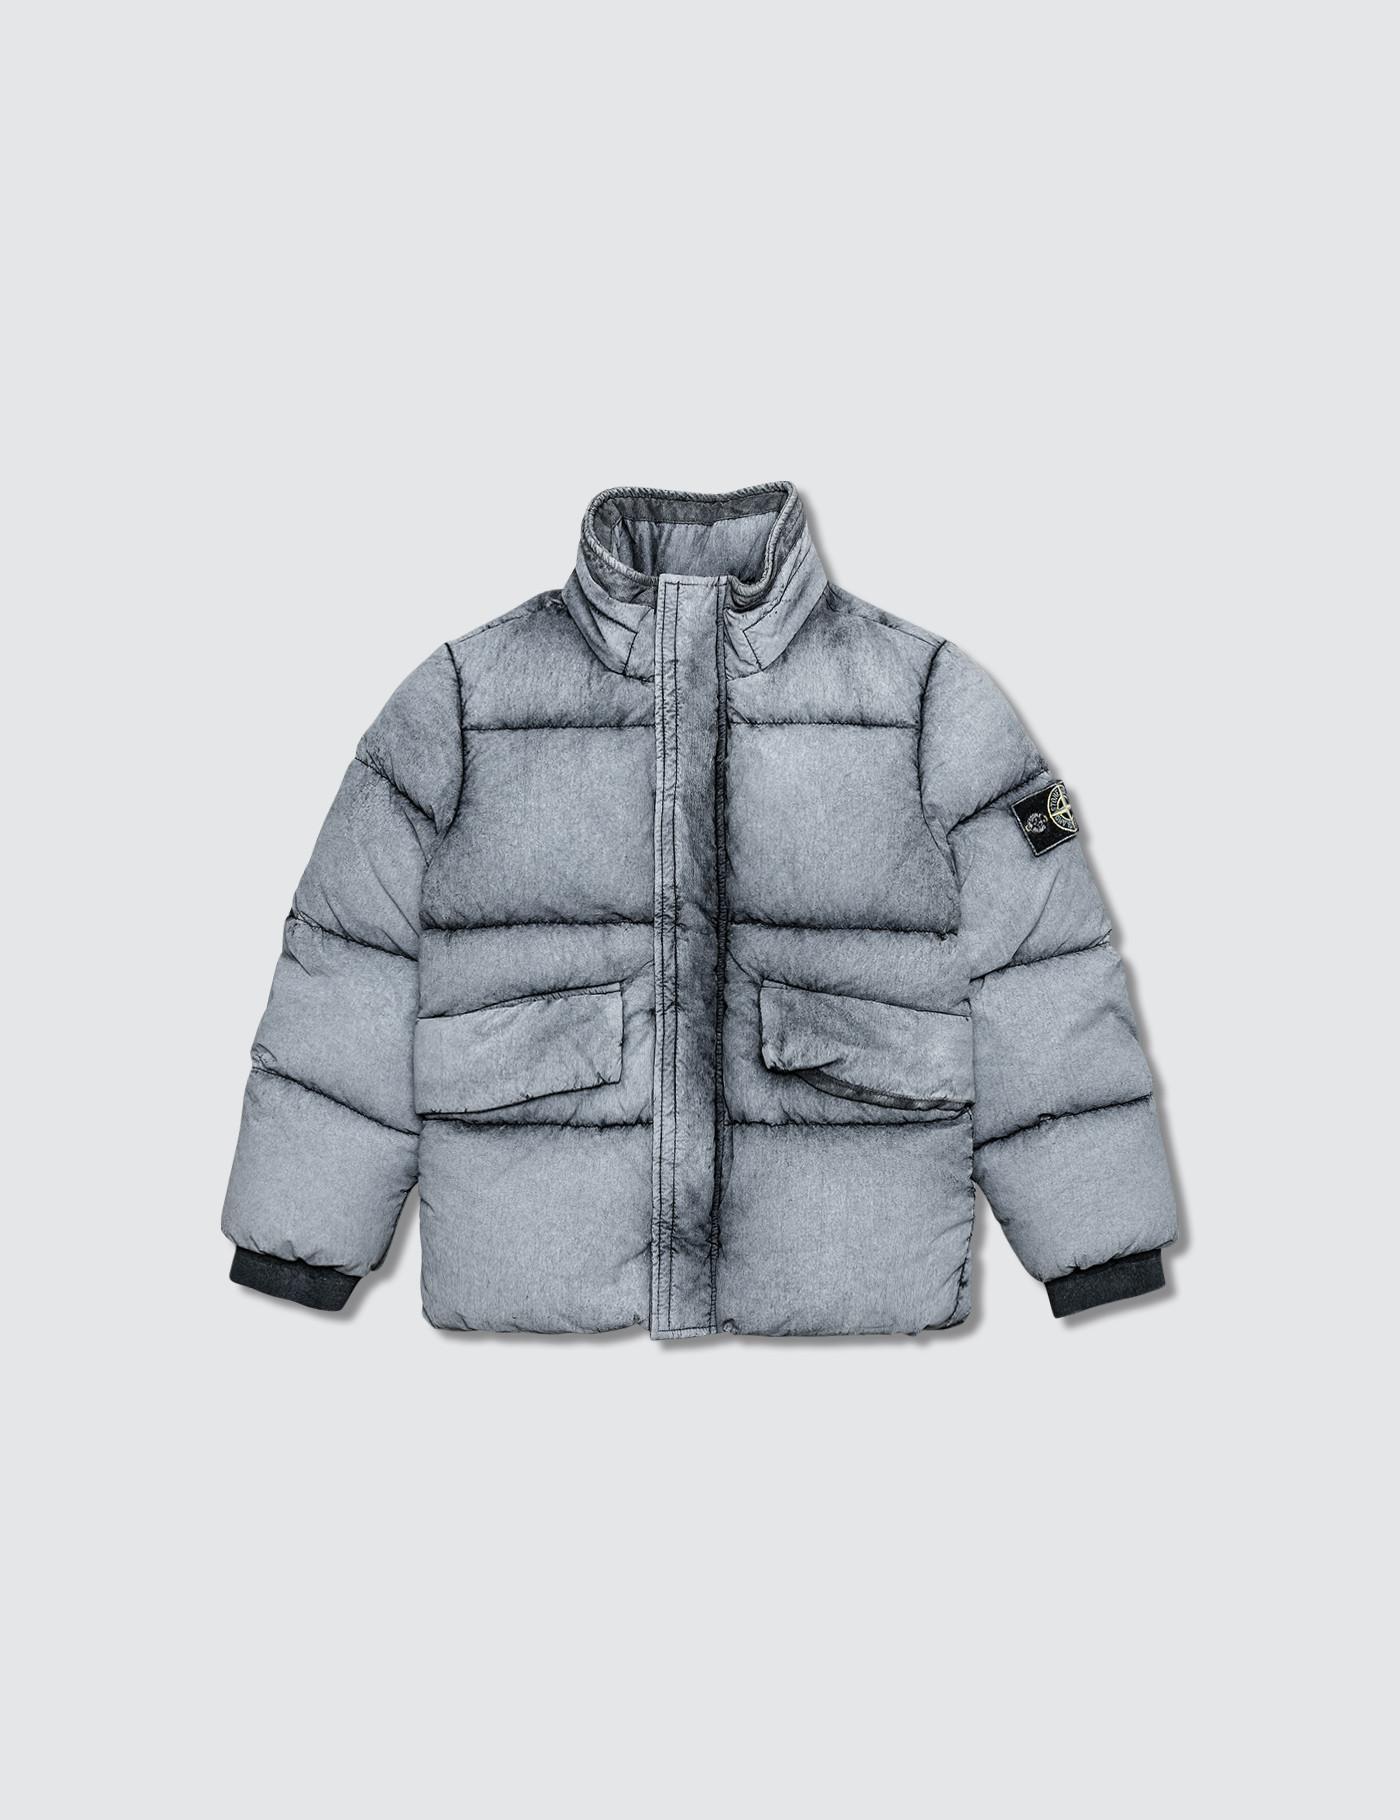 Stone Island Synthetic Degrade Puffer Jacket With Packable Hoodie (kids) in  Grey (Gray) - Lyst